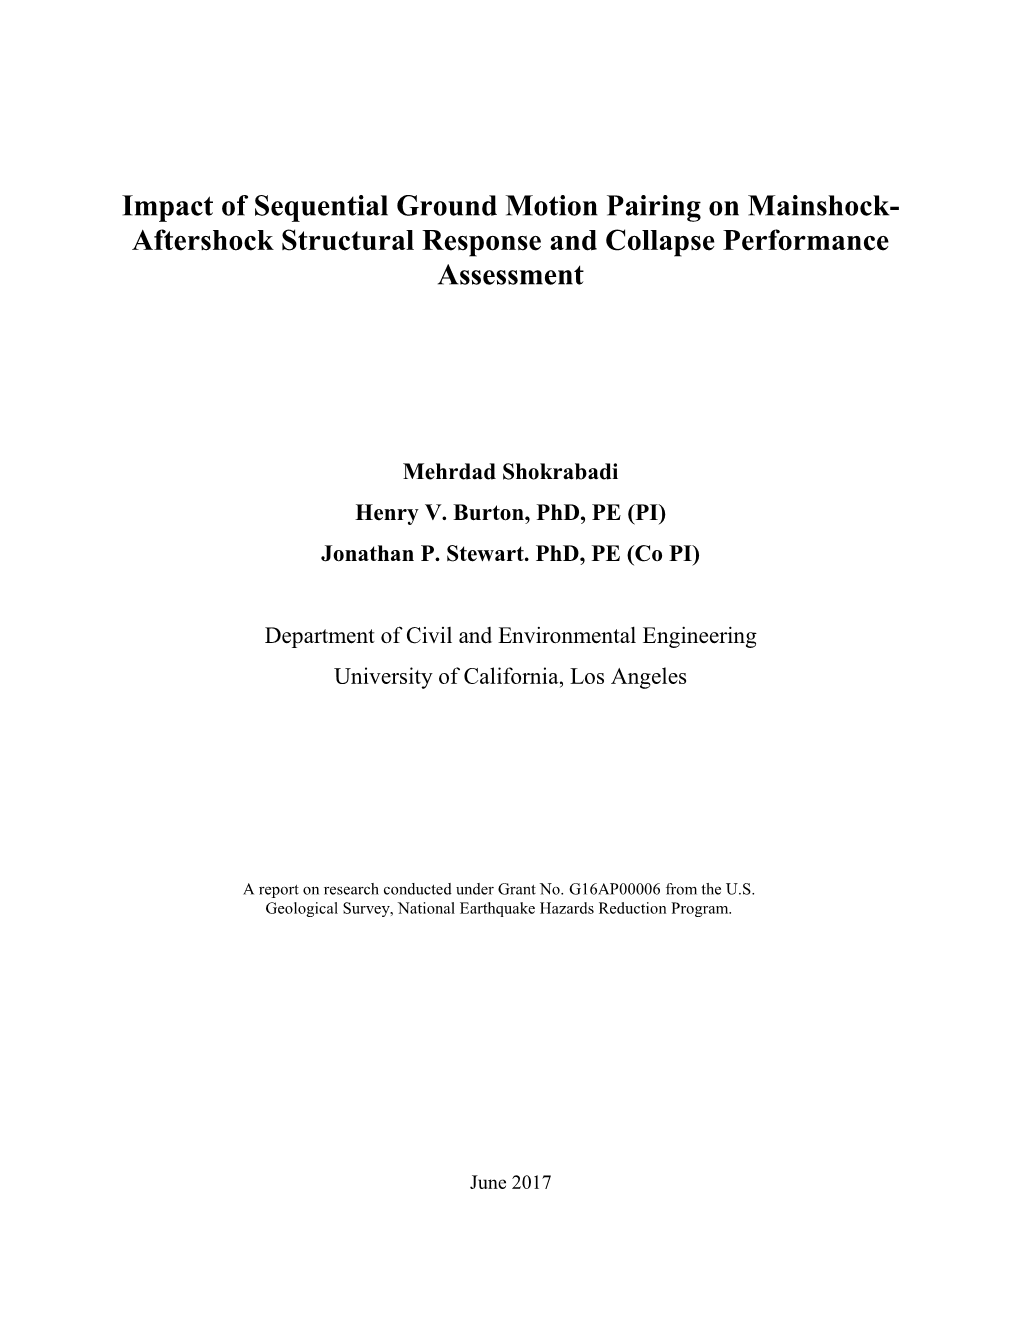 Impact of Sequential Ground Motion Pairing on Mainshock- Aftershock Structural Response and Collapse Performance Assessment